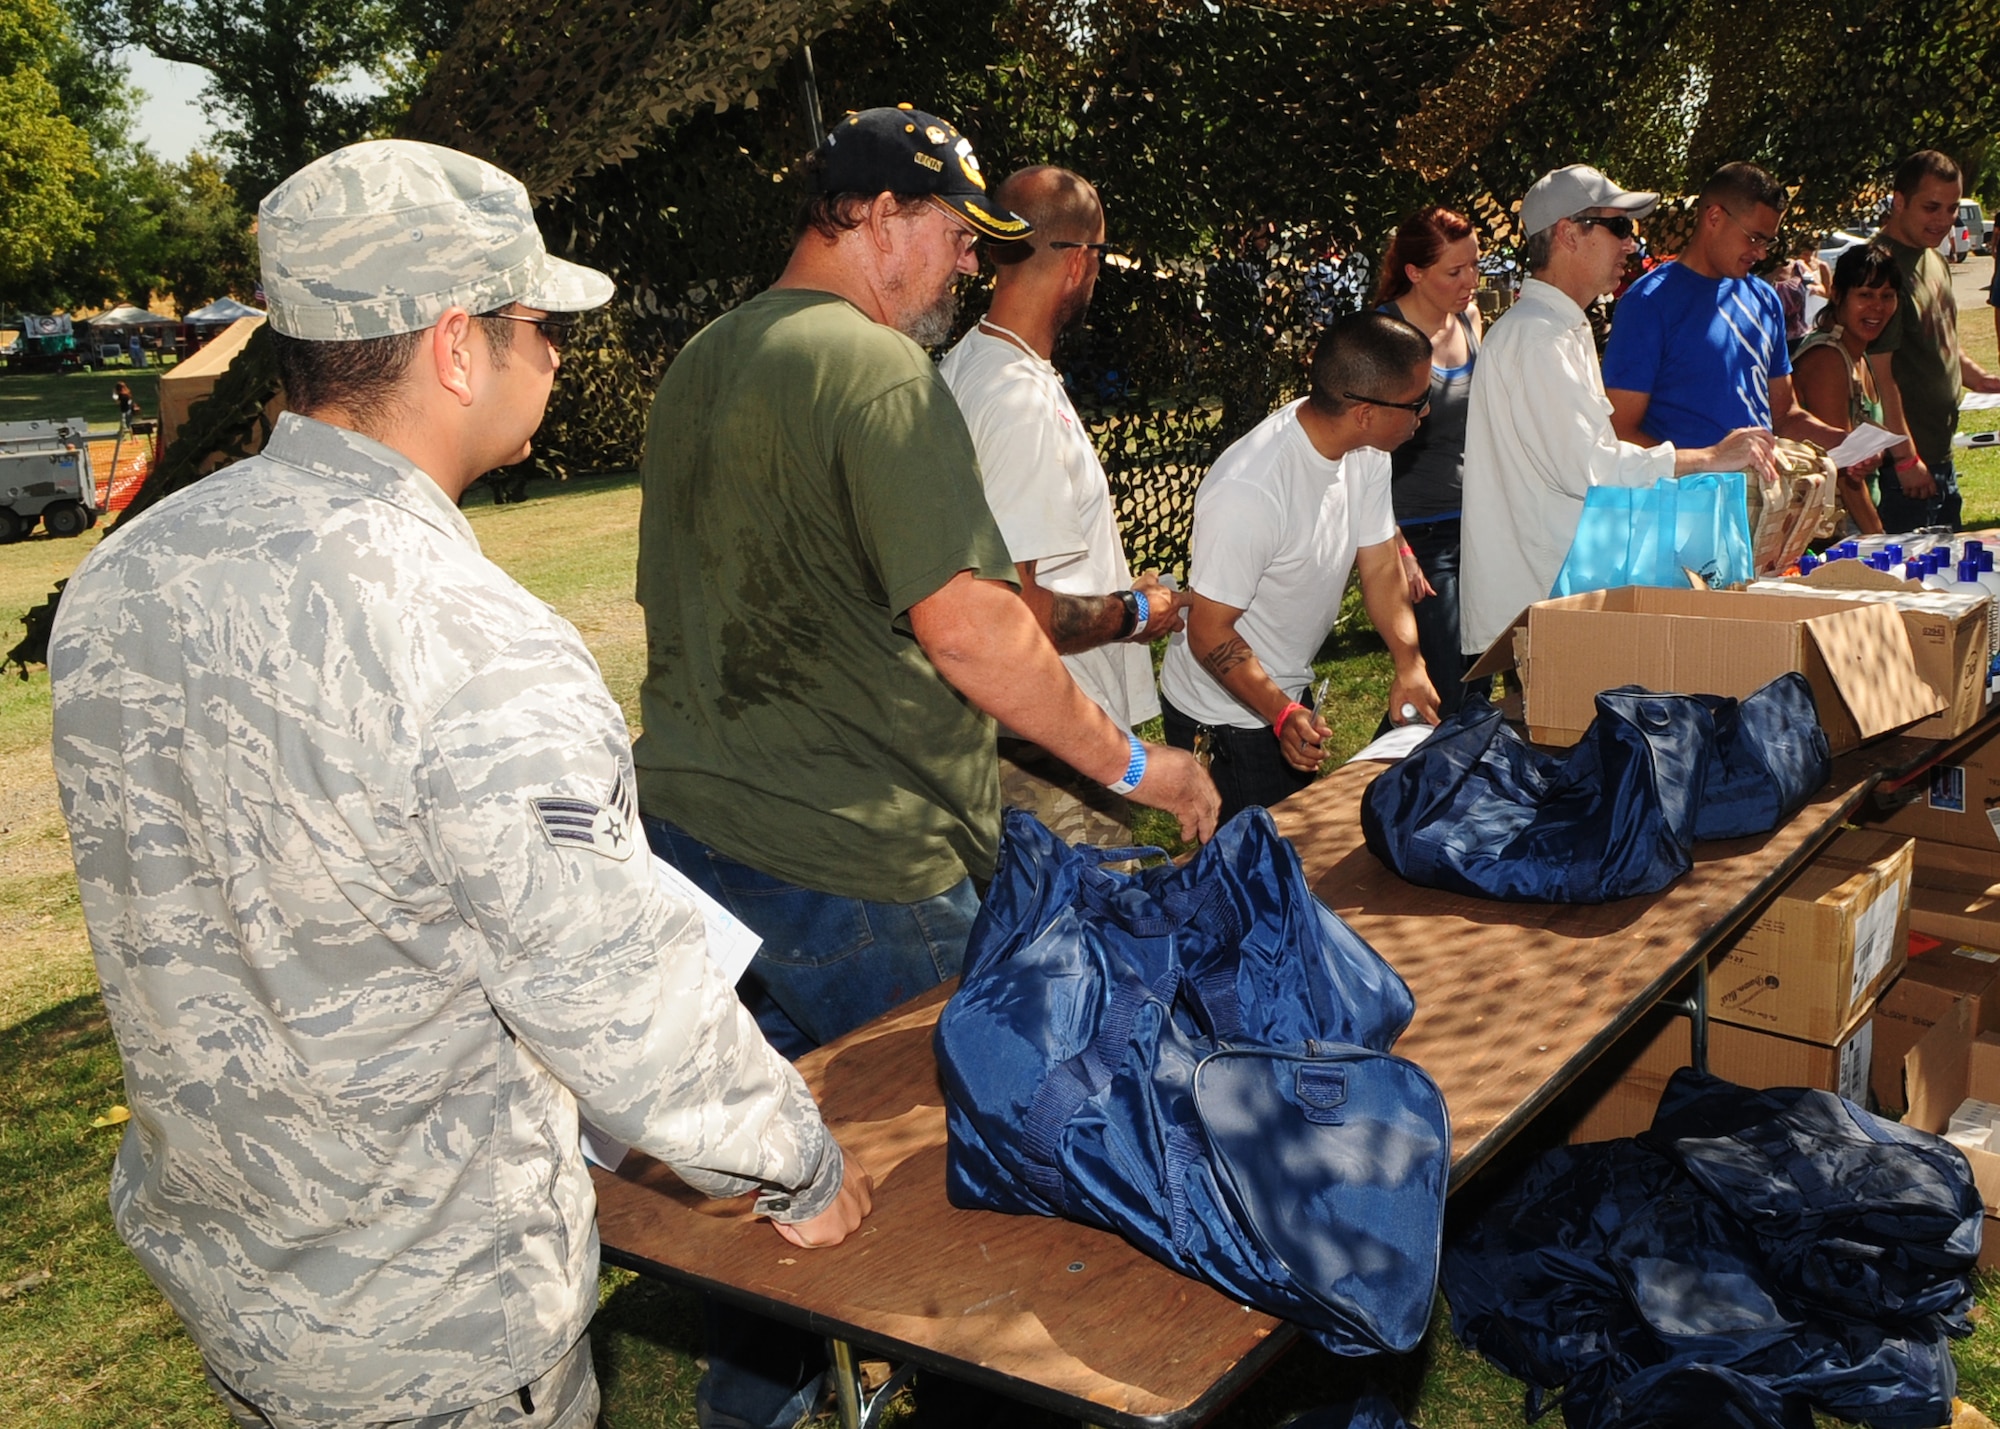 Veterans line up to receive clothing, sleeping bags and backpacks during the 2012 Veteran's Stand Down at River Bottoms Park in Marysville, Calif., August 24, 2012. Each veteran was escorted by a Beale Air Force Base, Calif., Airman. (U.S. Air Force photo by Senior Airman Shawn Nickel)